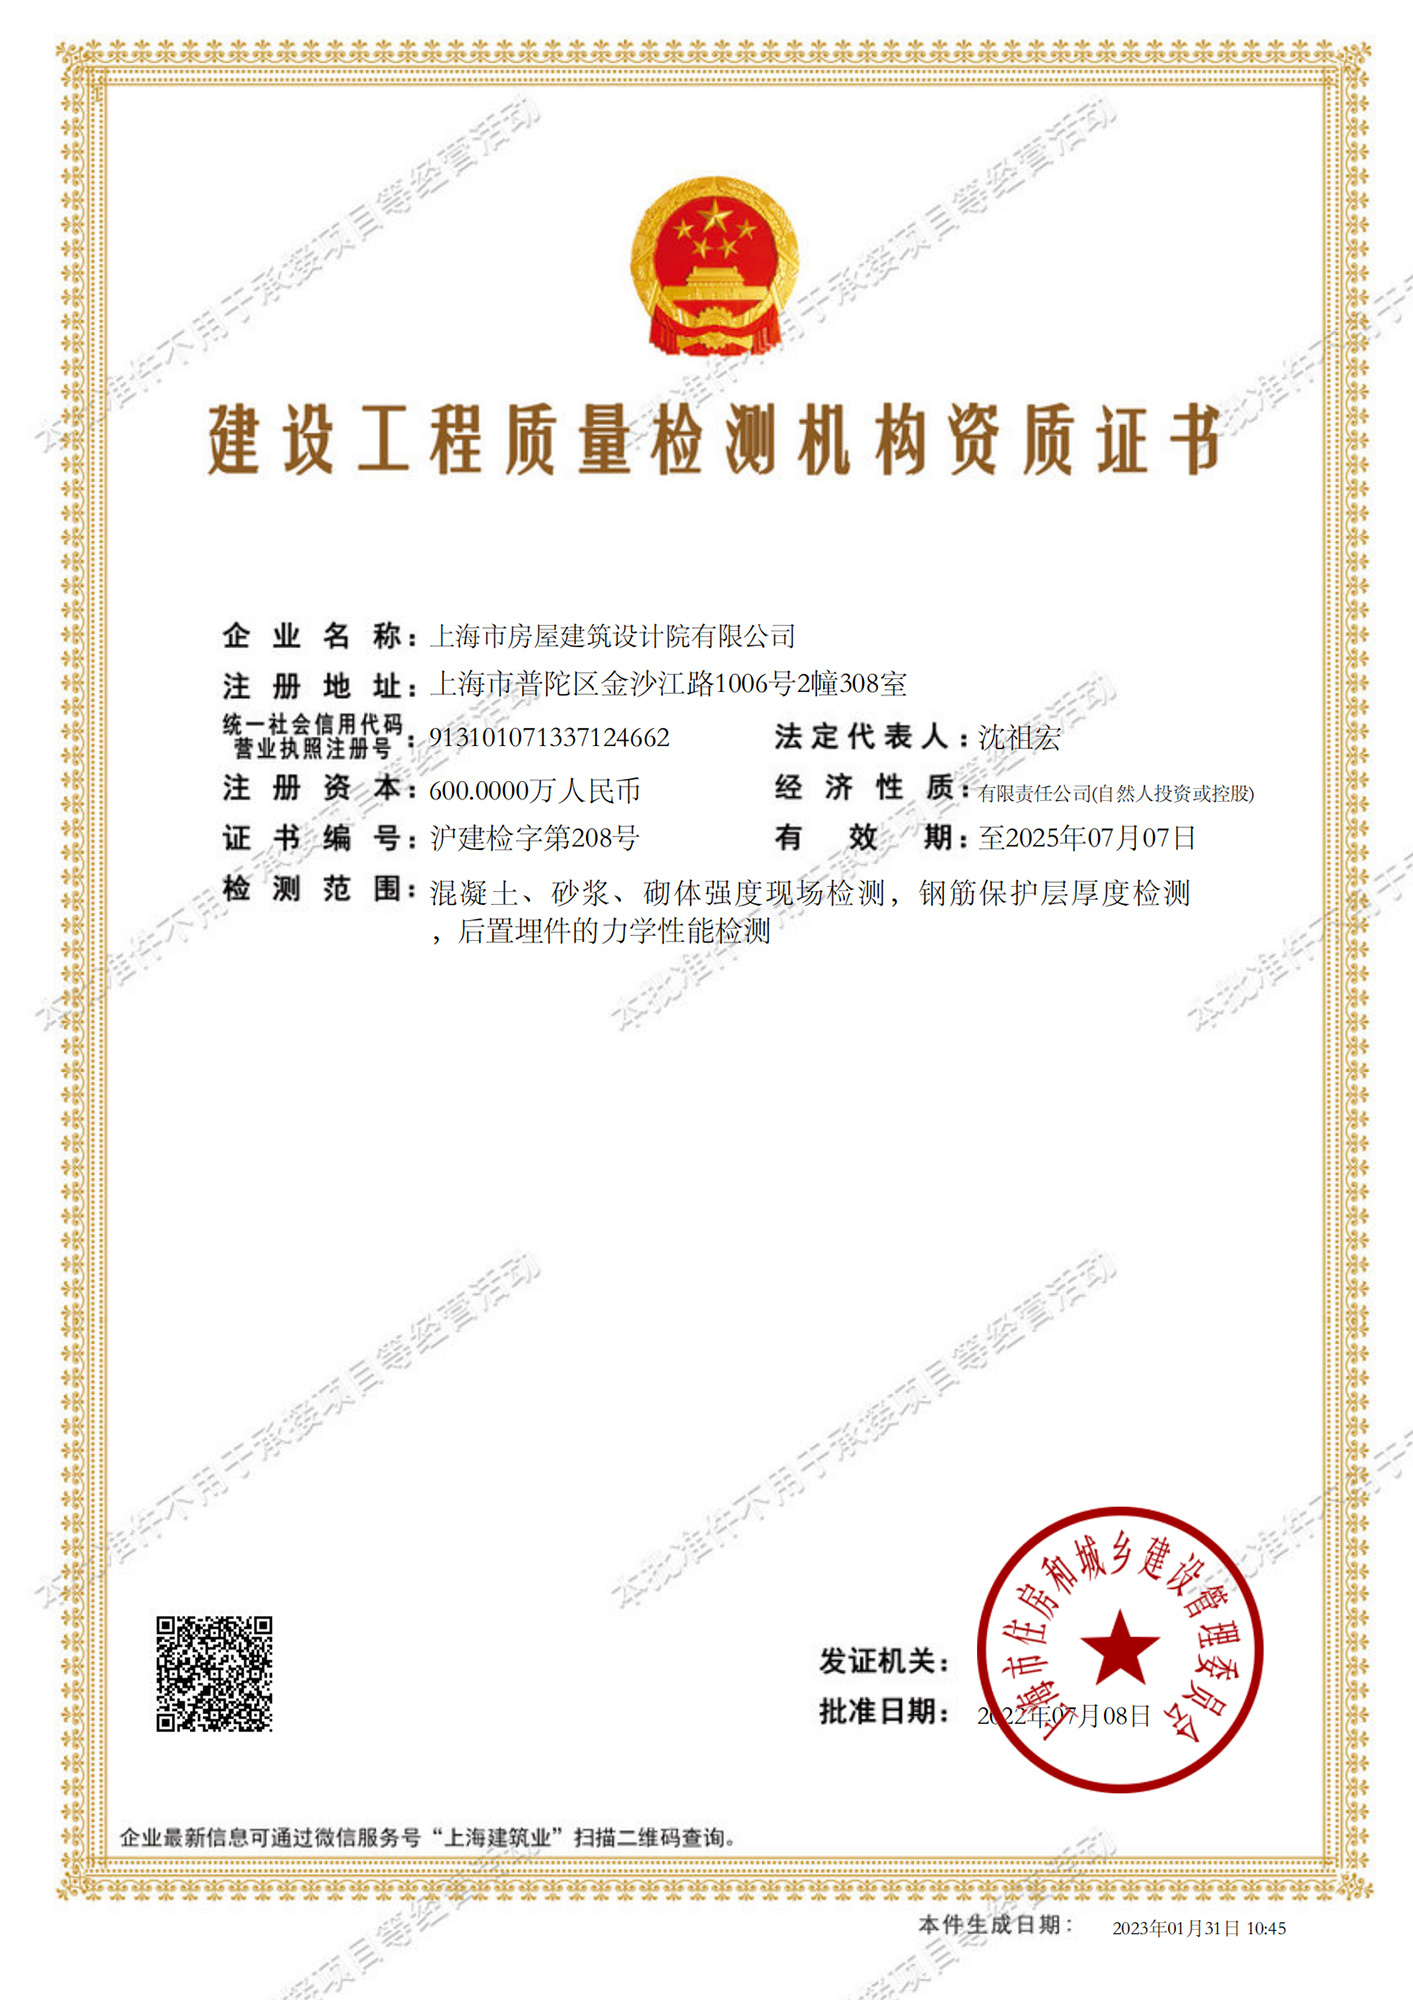 Qualification Certificate of Construction Engineering Quality Inspection Agency